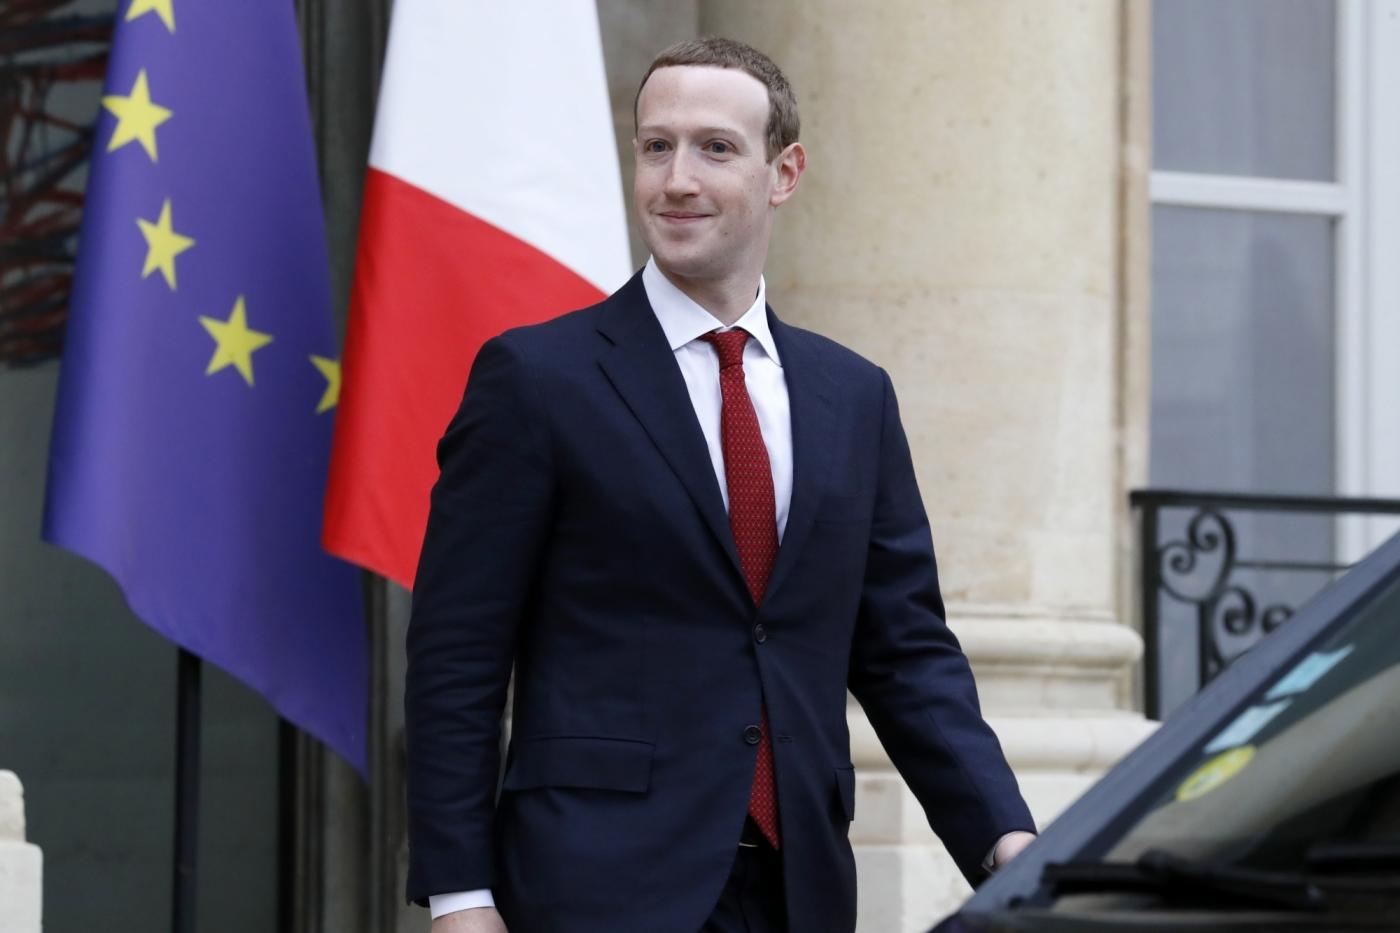 PARIS, May 10, 2019 (Xinhua) -- Facebook CEO Mark Zuckerberg leaves the Elysee Palace after a meeting with French President Emmanuel Macron in Paris, France, on May 10, 2019. (Xinhua/Jack Chan/IANS) by .